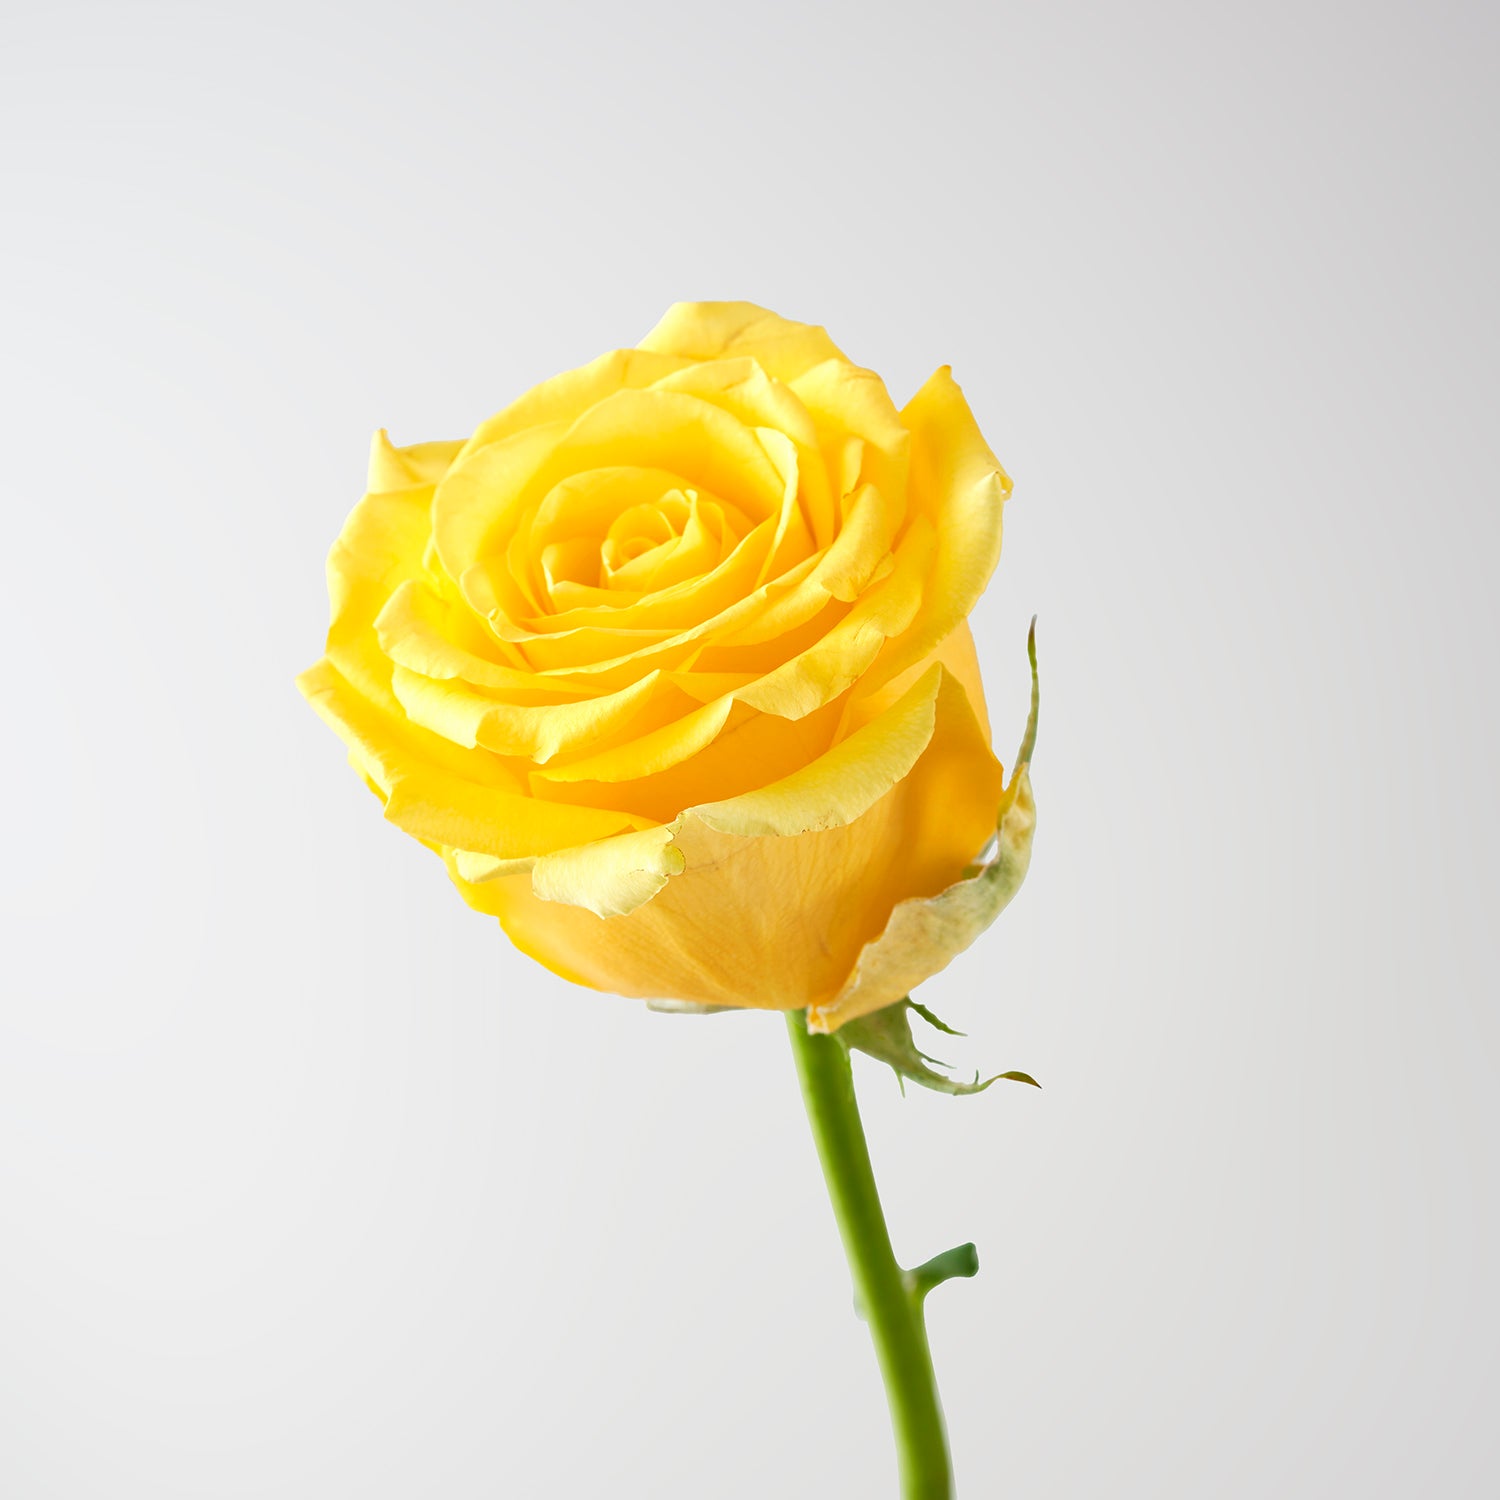 Closeup of one yellow rose on white background